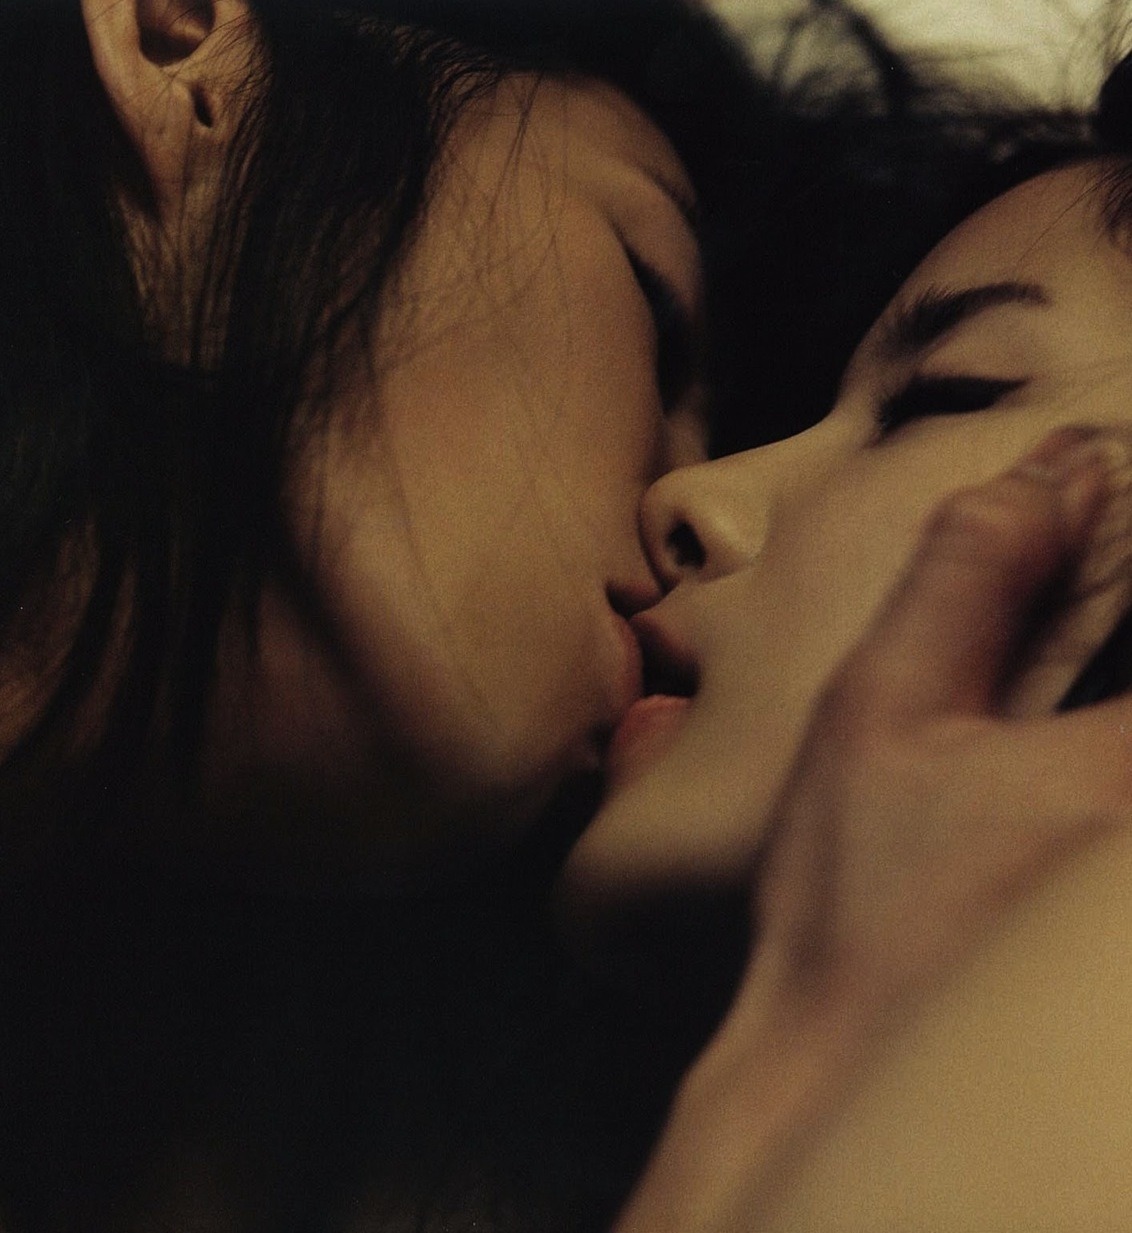 jeou:  human inhibitions, lee ji-yeon and song jae rim for marie claire korea, december